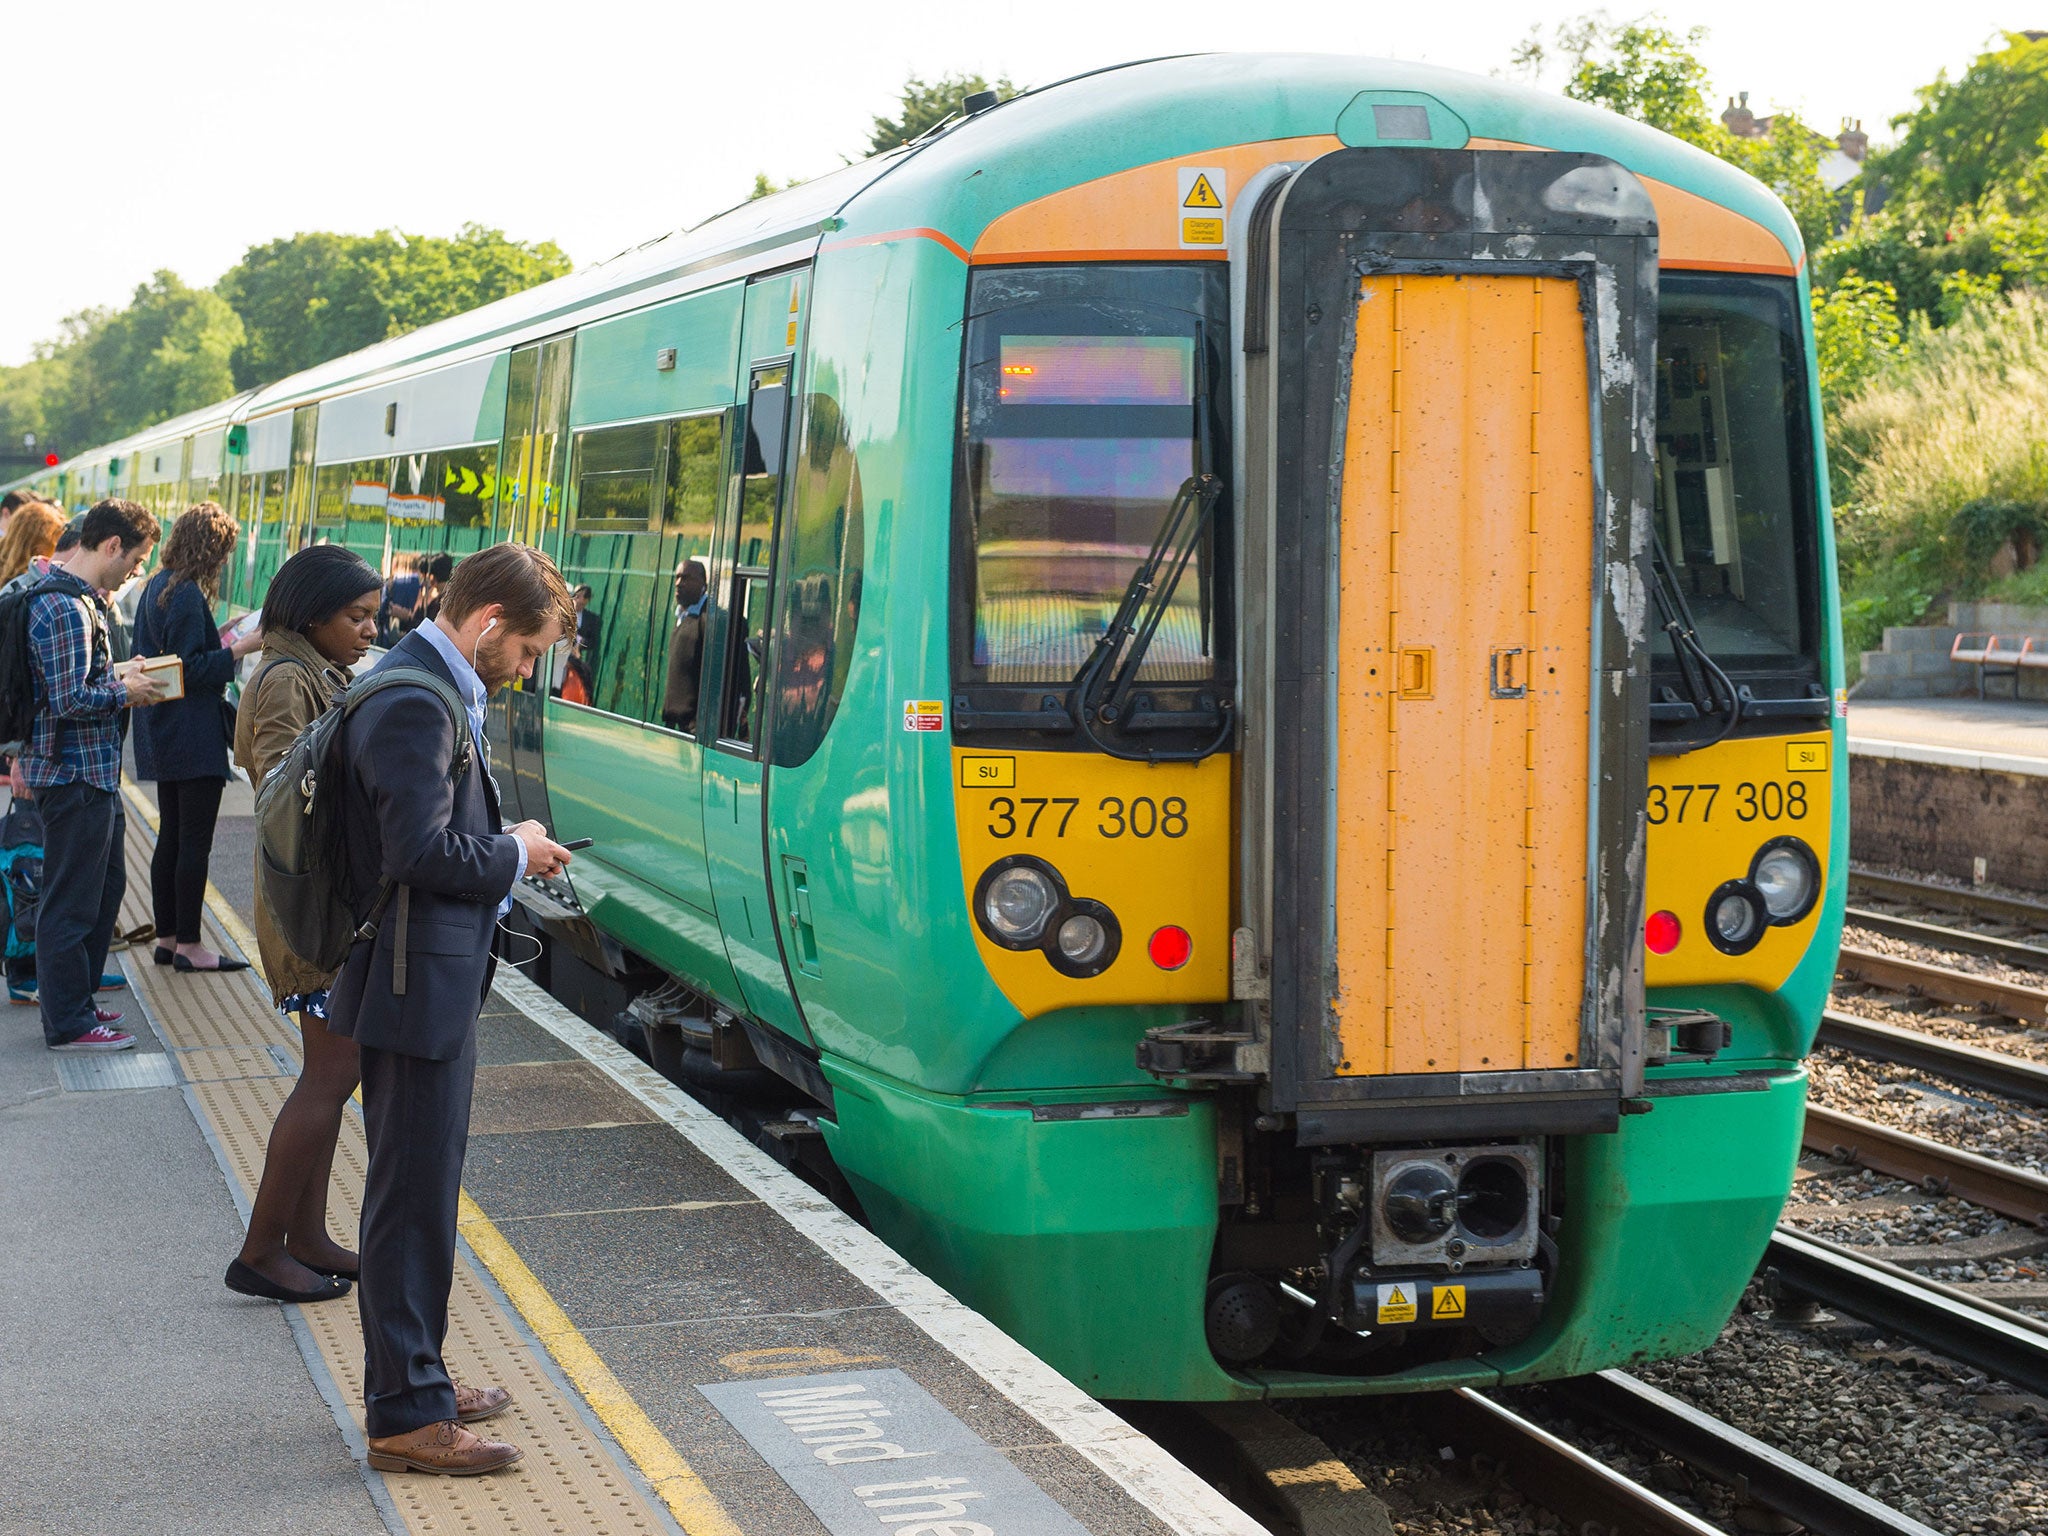 Train fares have risen by 25% in the last six years